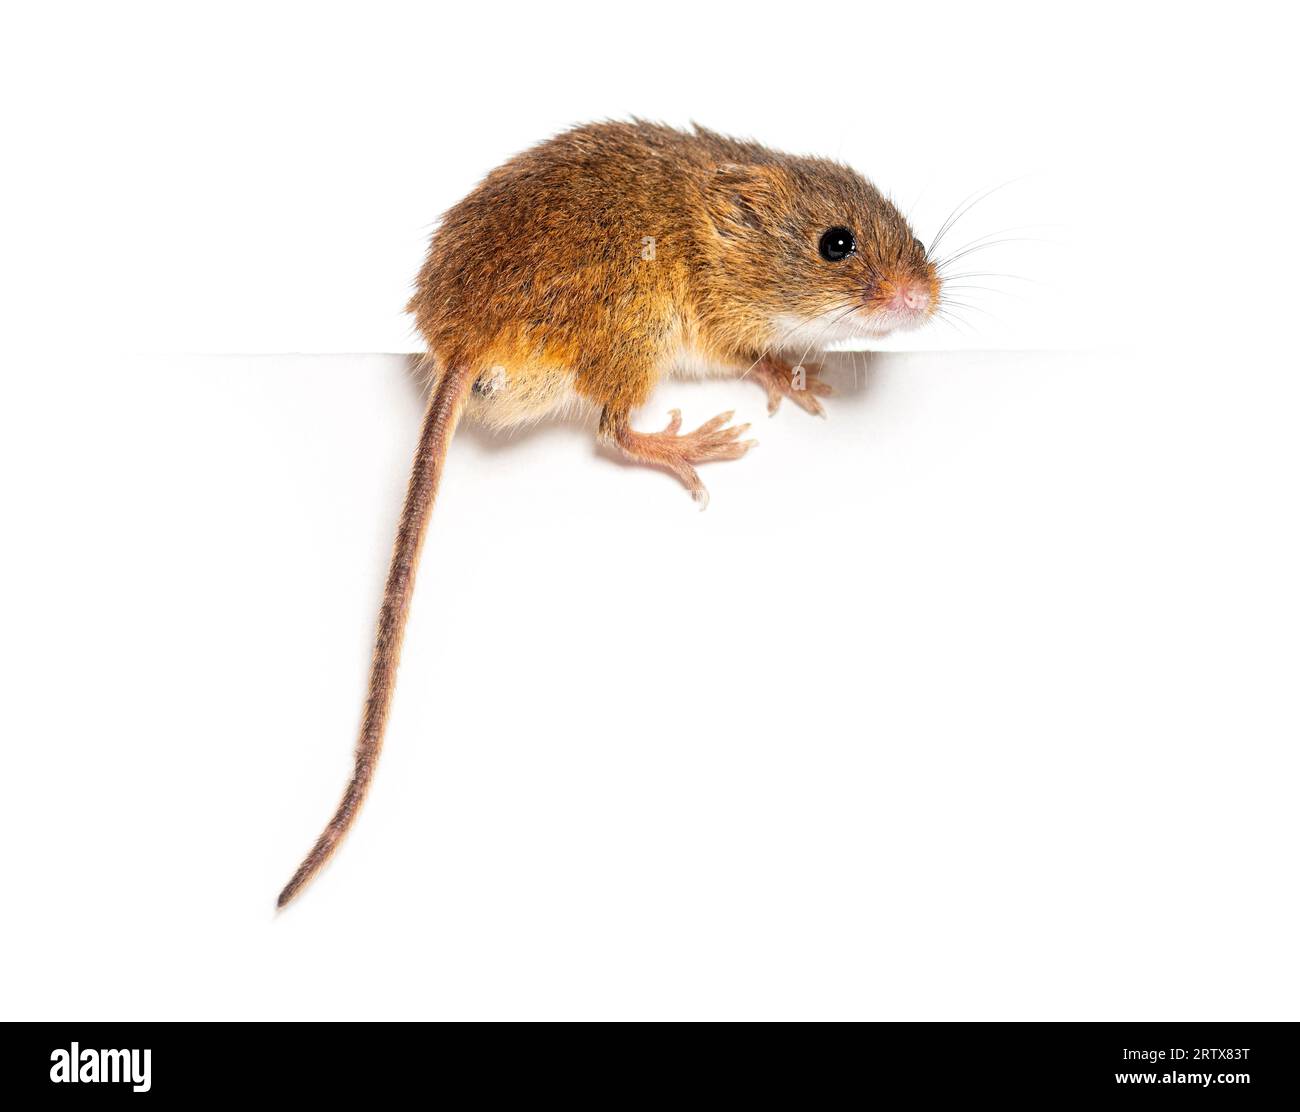 Harvest mouse, Micromys minutus, balancing on an edge, isolated on white Stock Photo